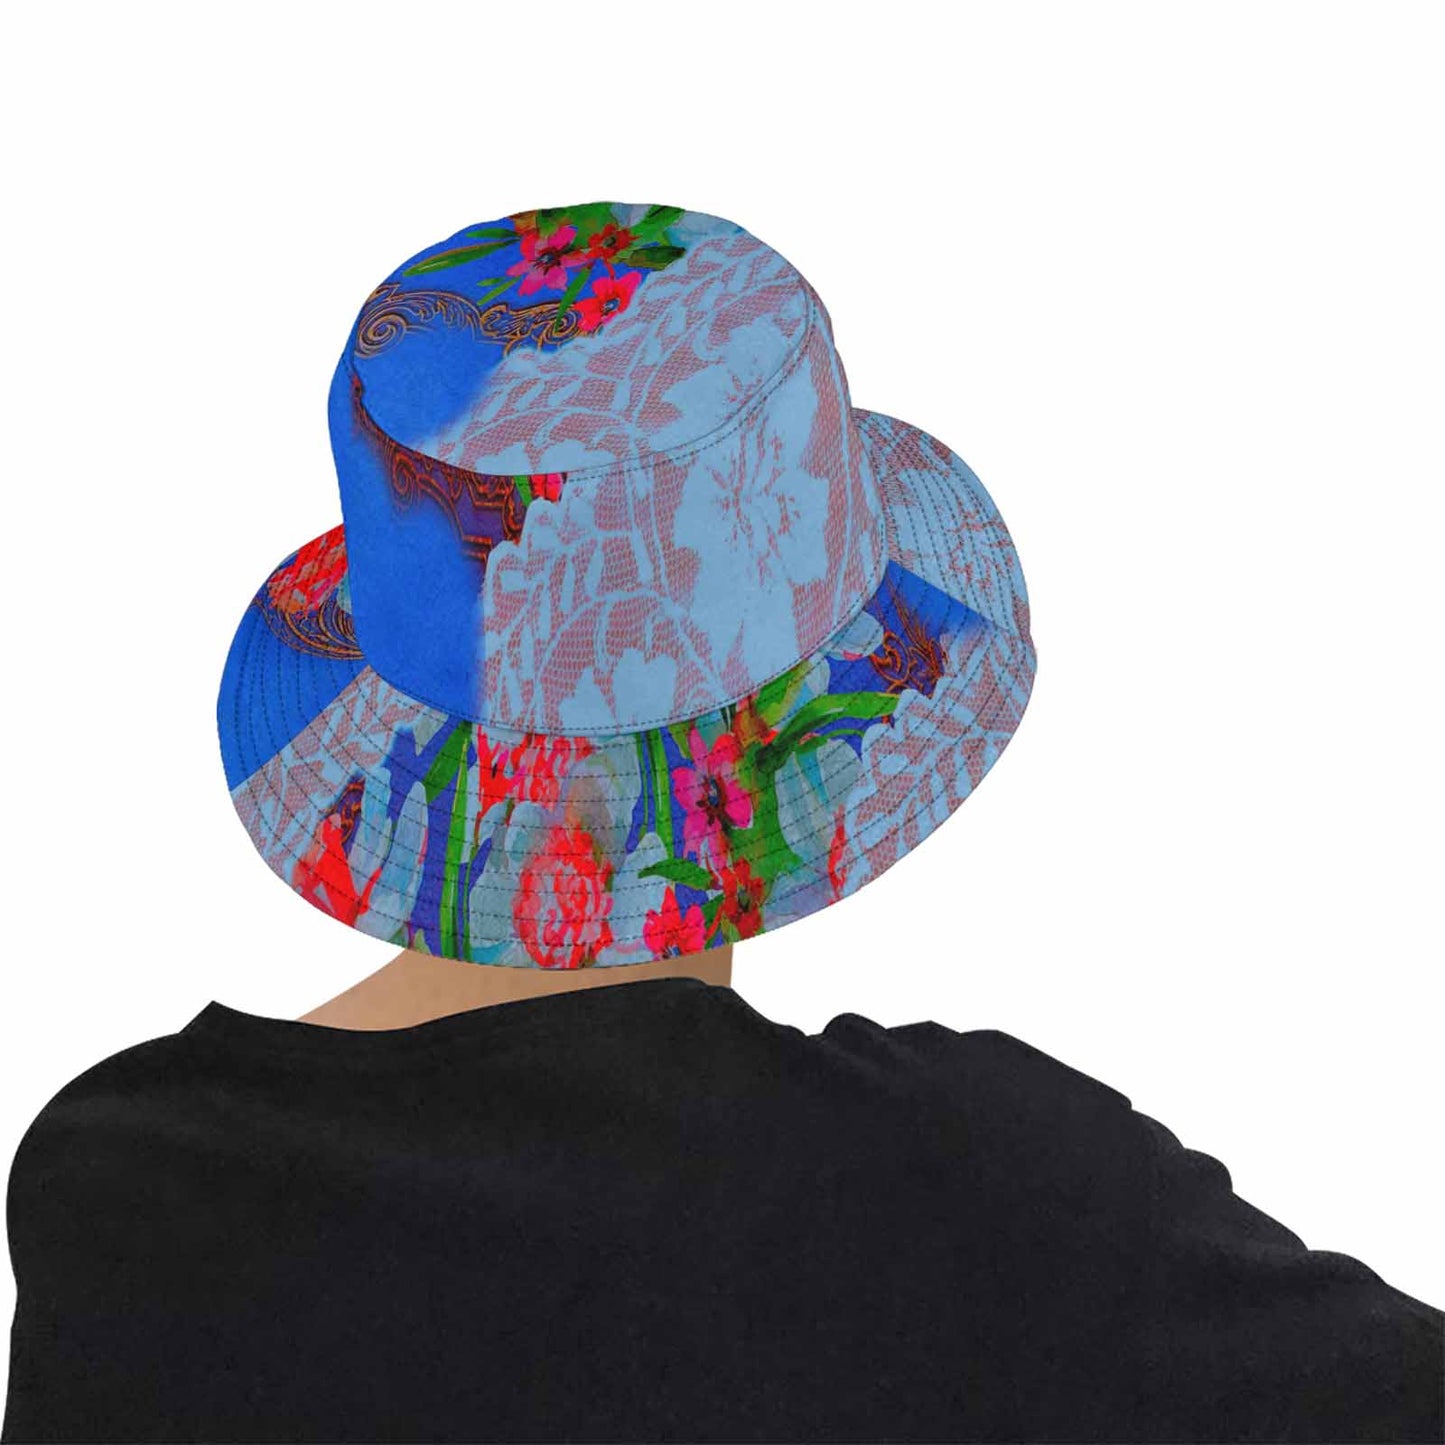 Victorian lace Bucket Hat, outdoors hat, design 46